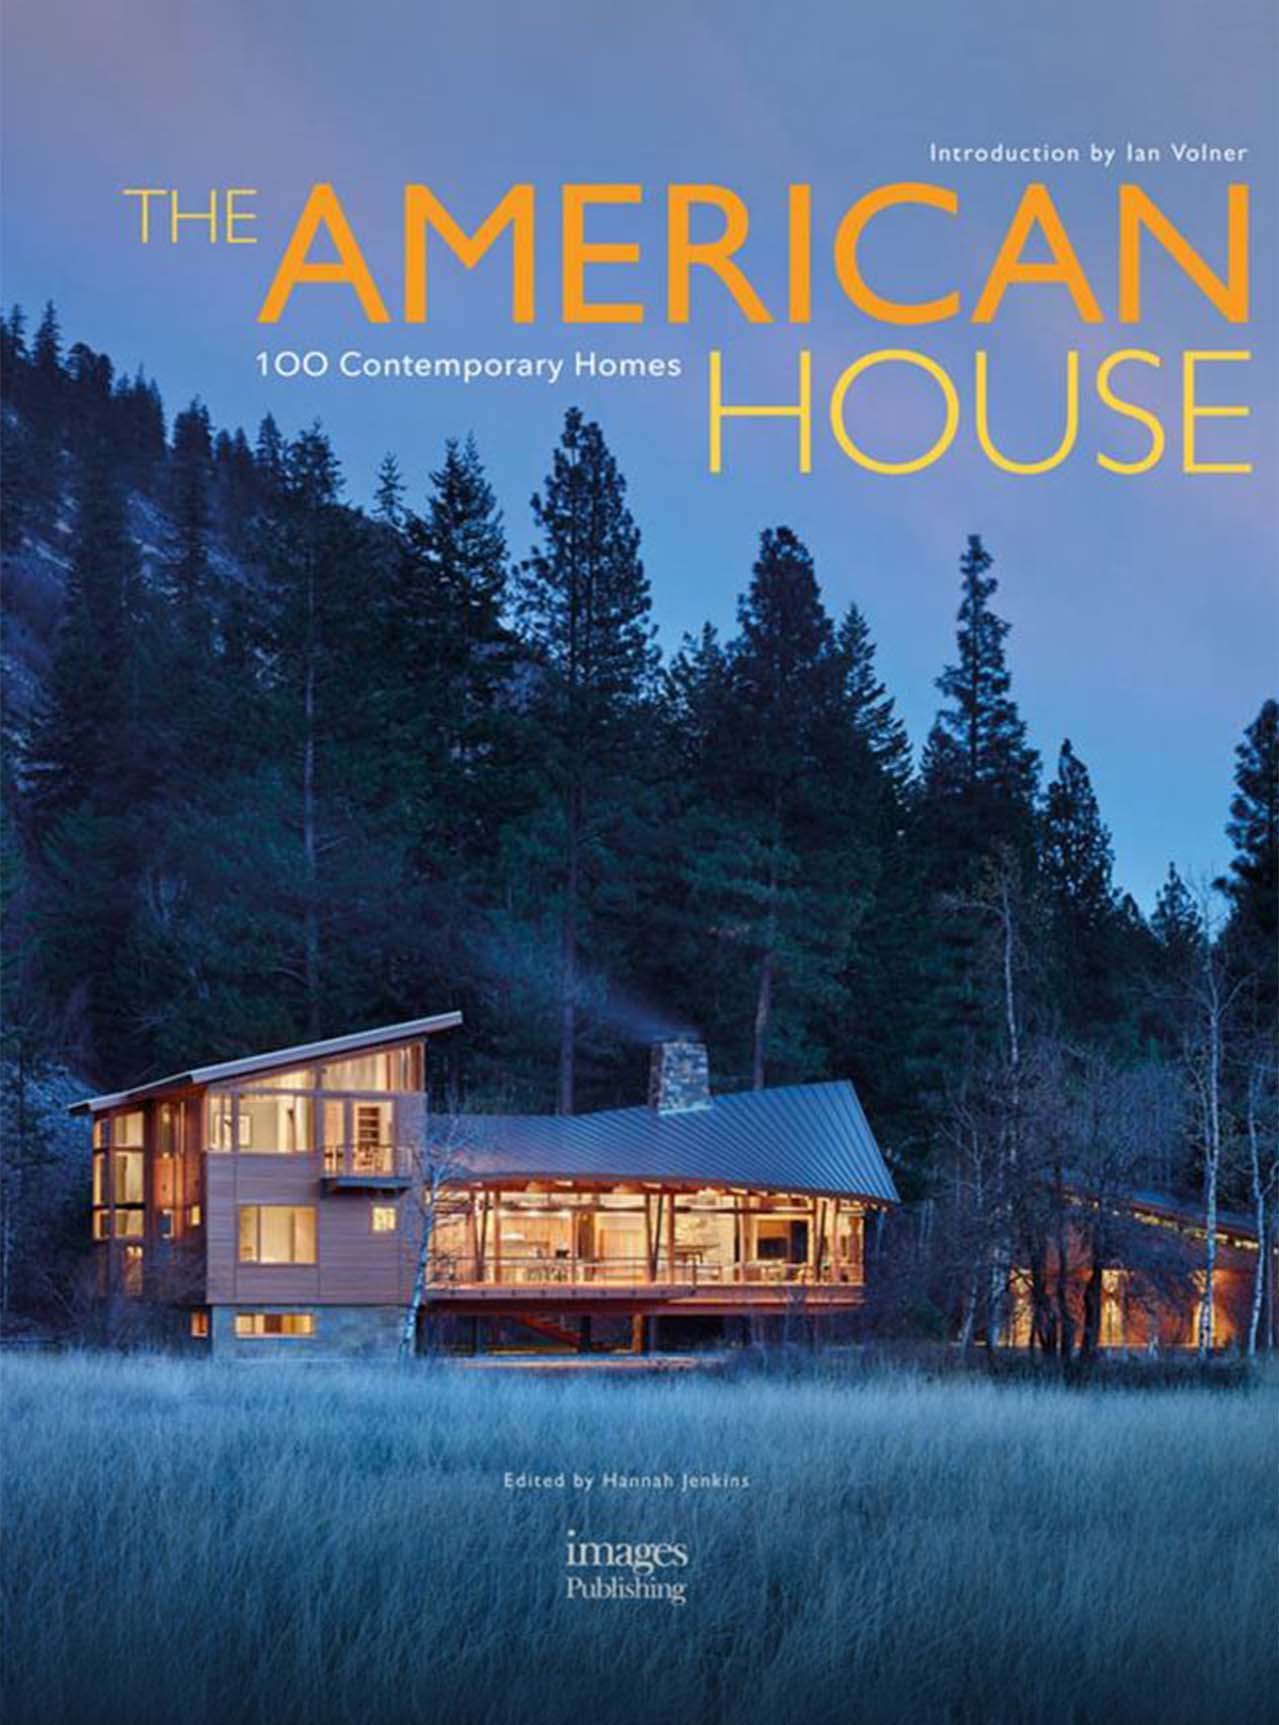 The American House, 100 Contemporary Homes